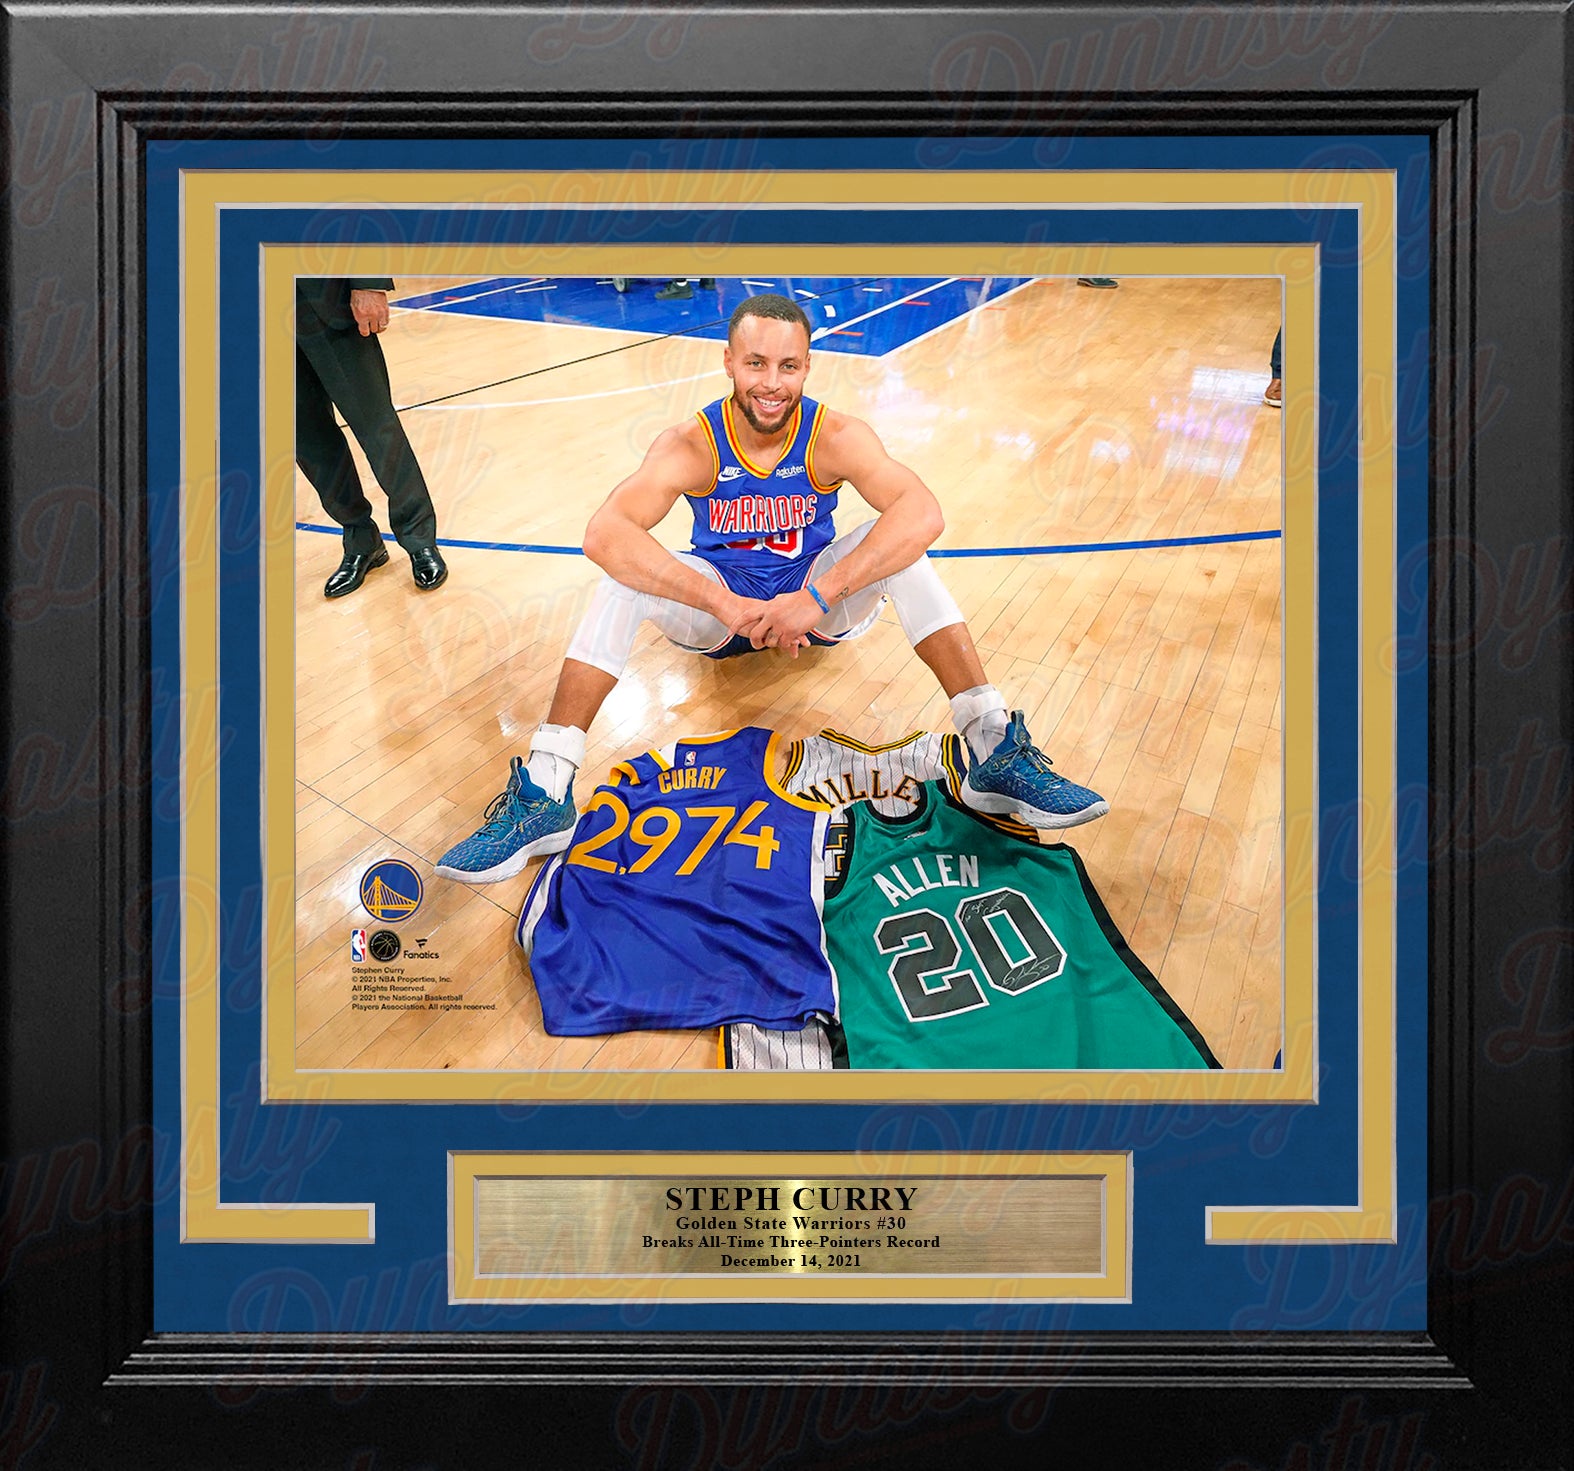 steph curry signed framed jersey